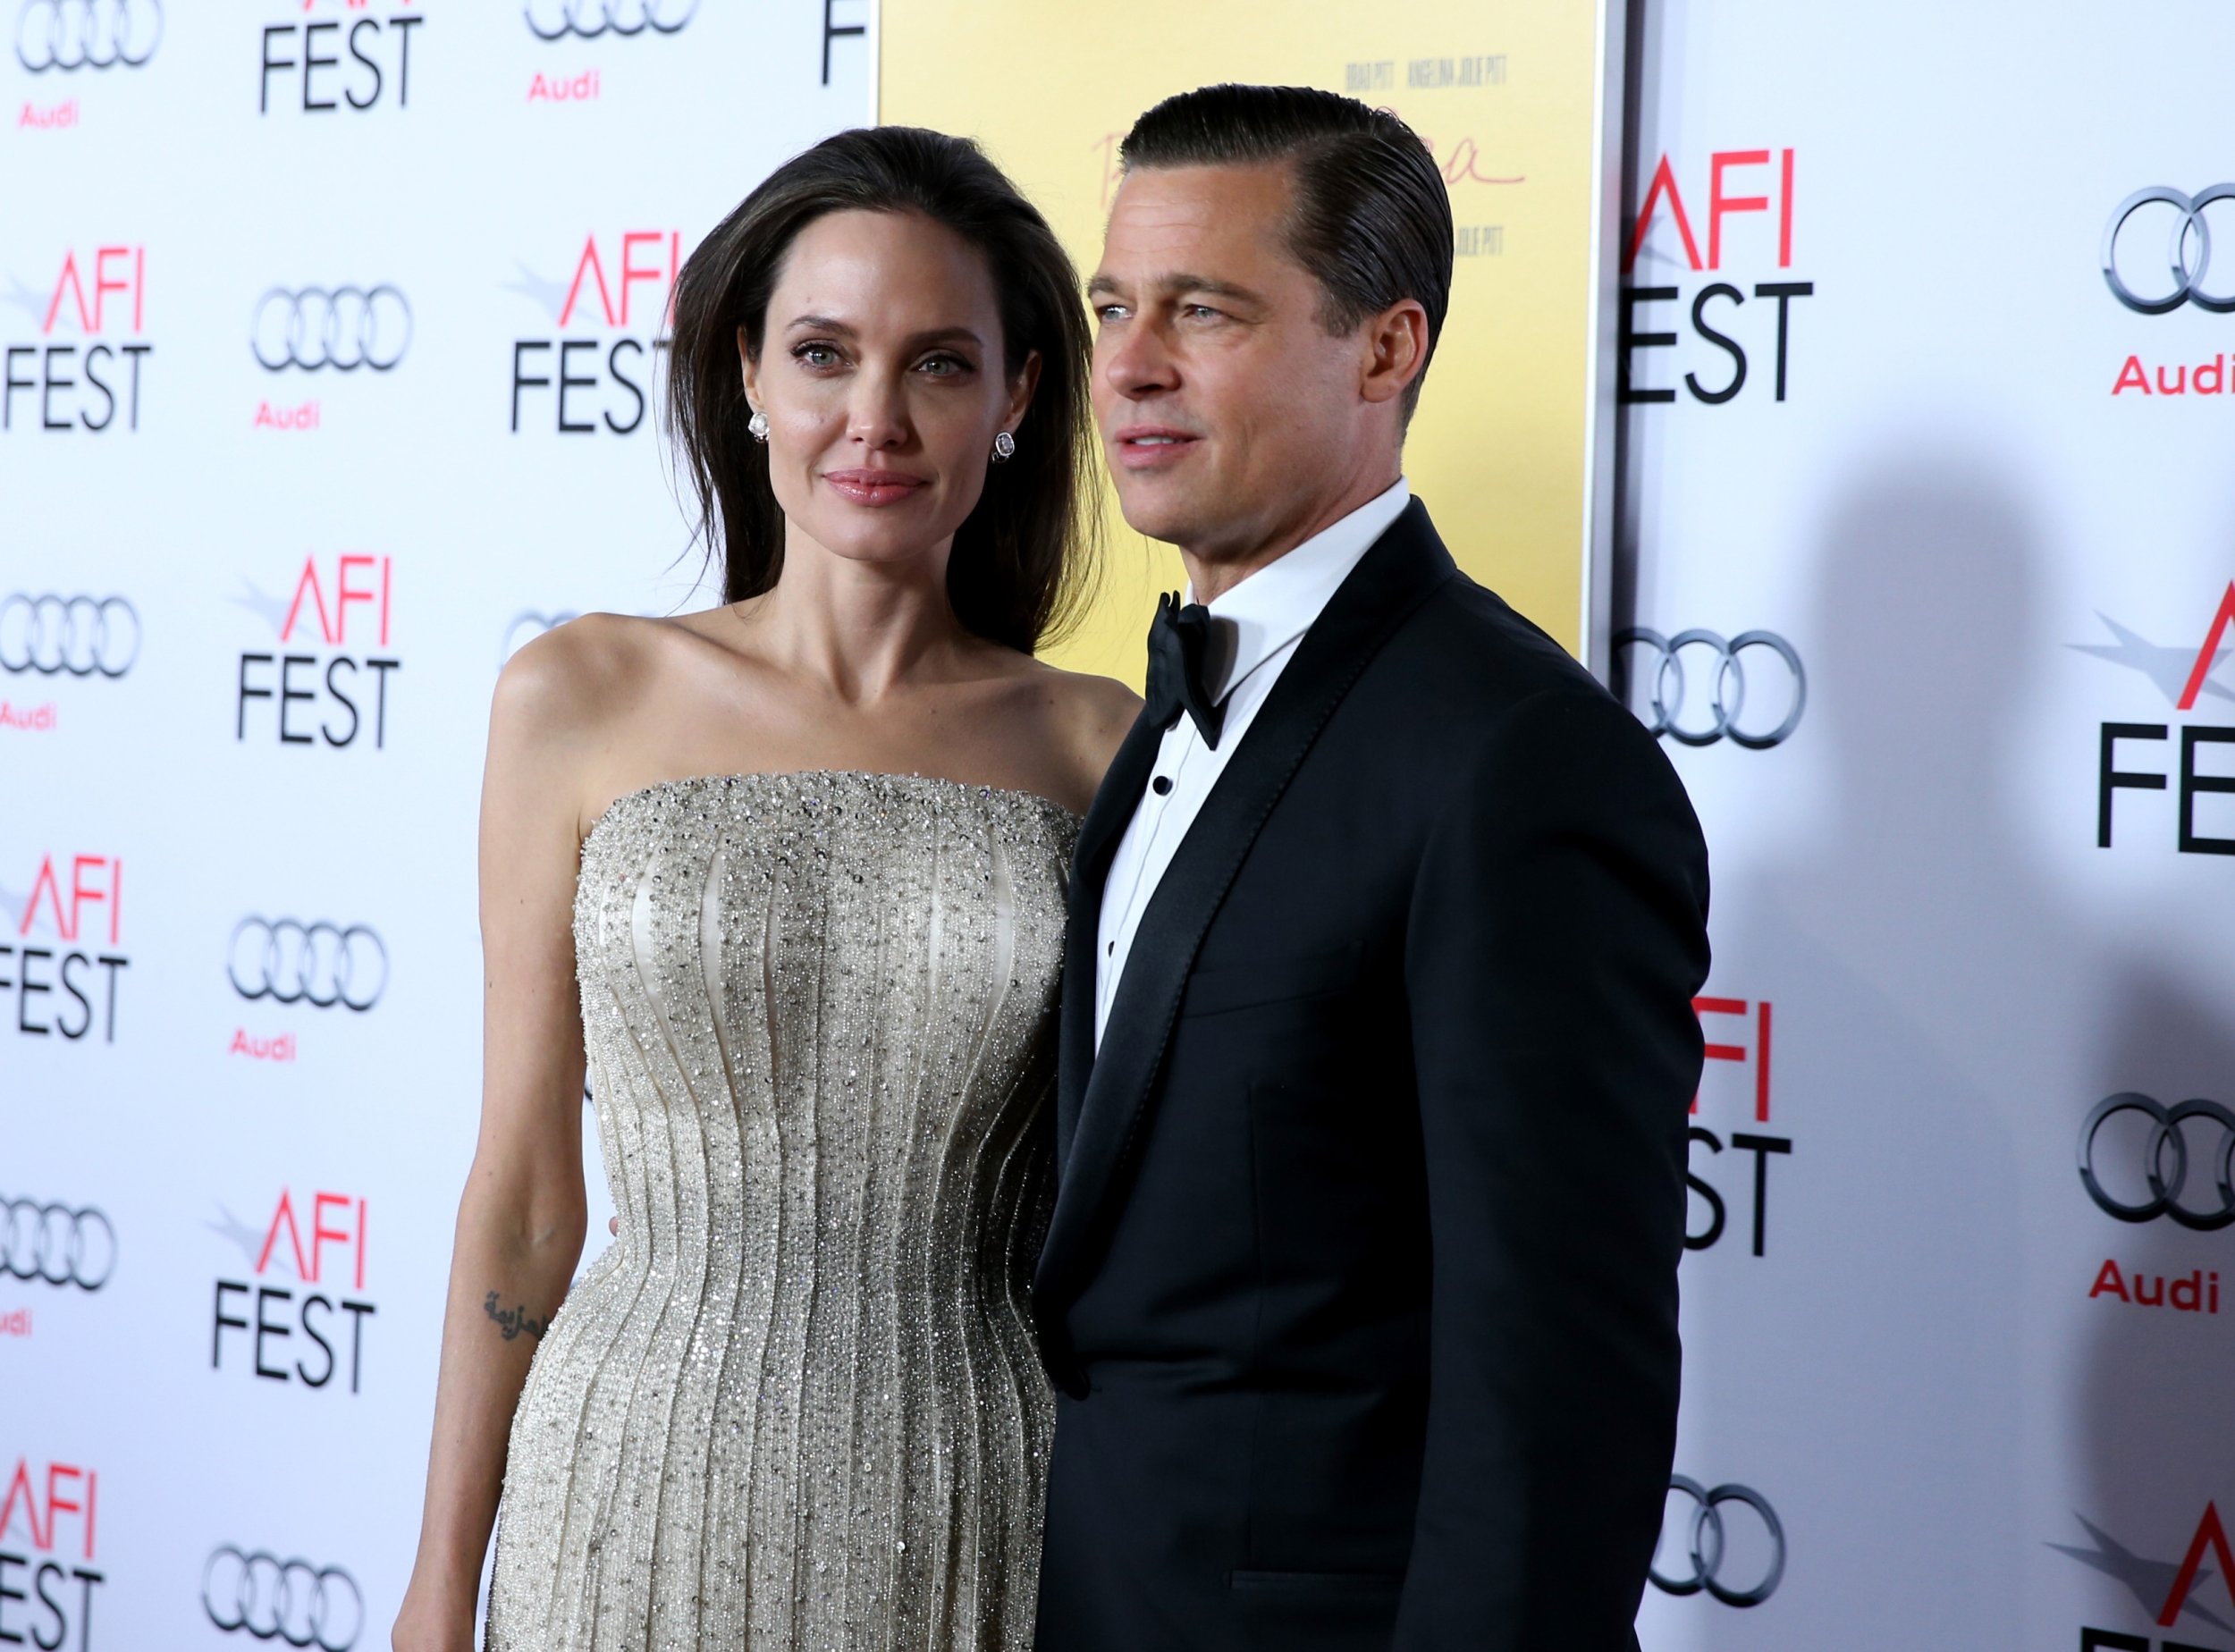 Brad Pitt, Angelina Jolie Net Worth: Who Gets The Money After The Divorce?